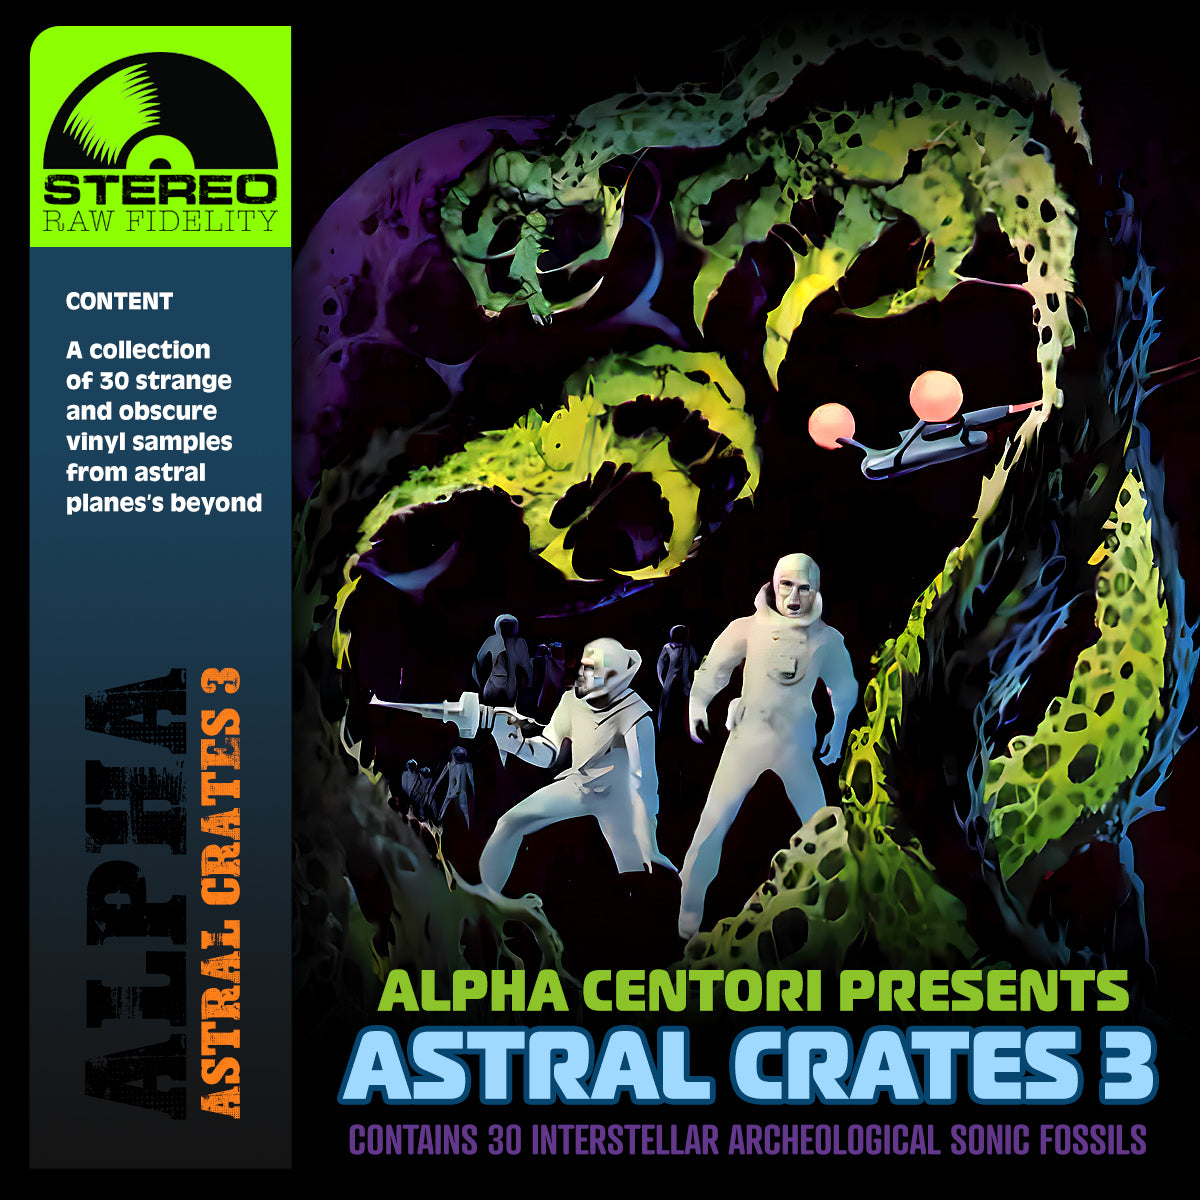 Astral Crates 3